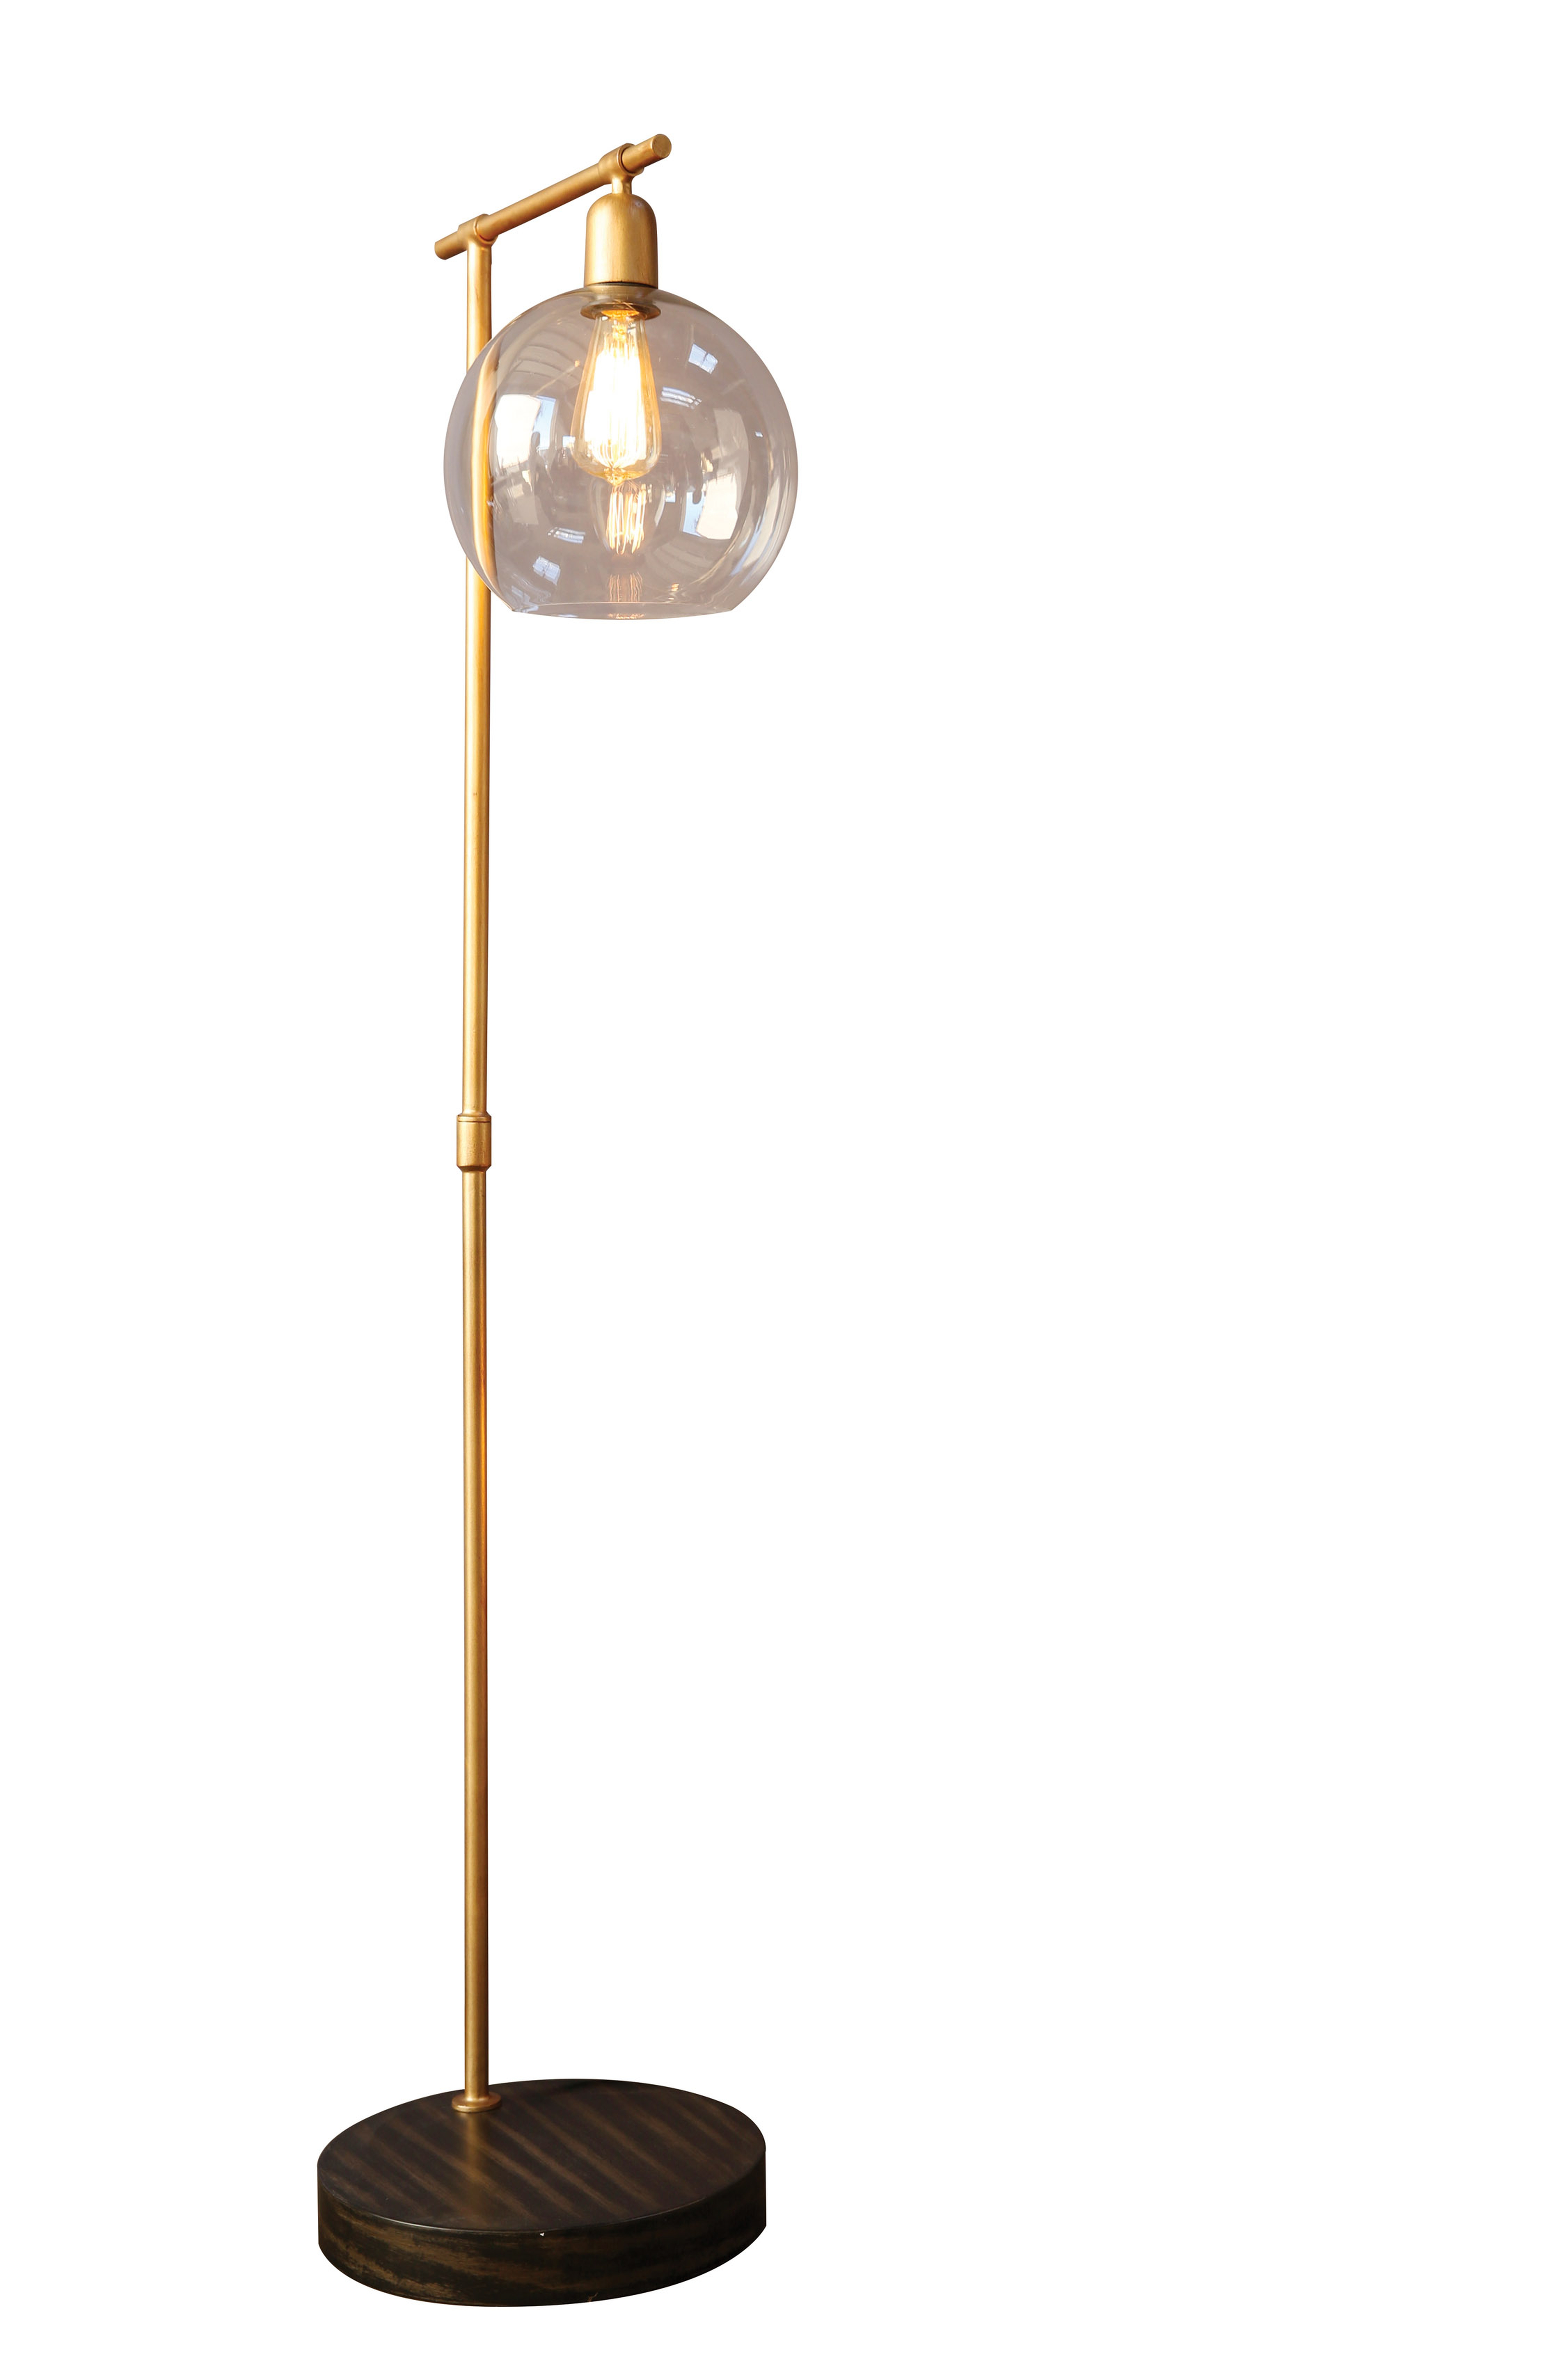 Metal & Wood Floor Lamp with Gold Finish and Glass Globe Shade - Nomad Home